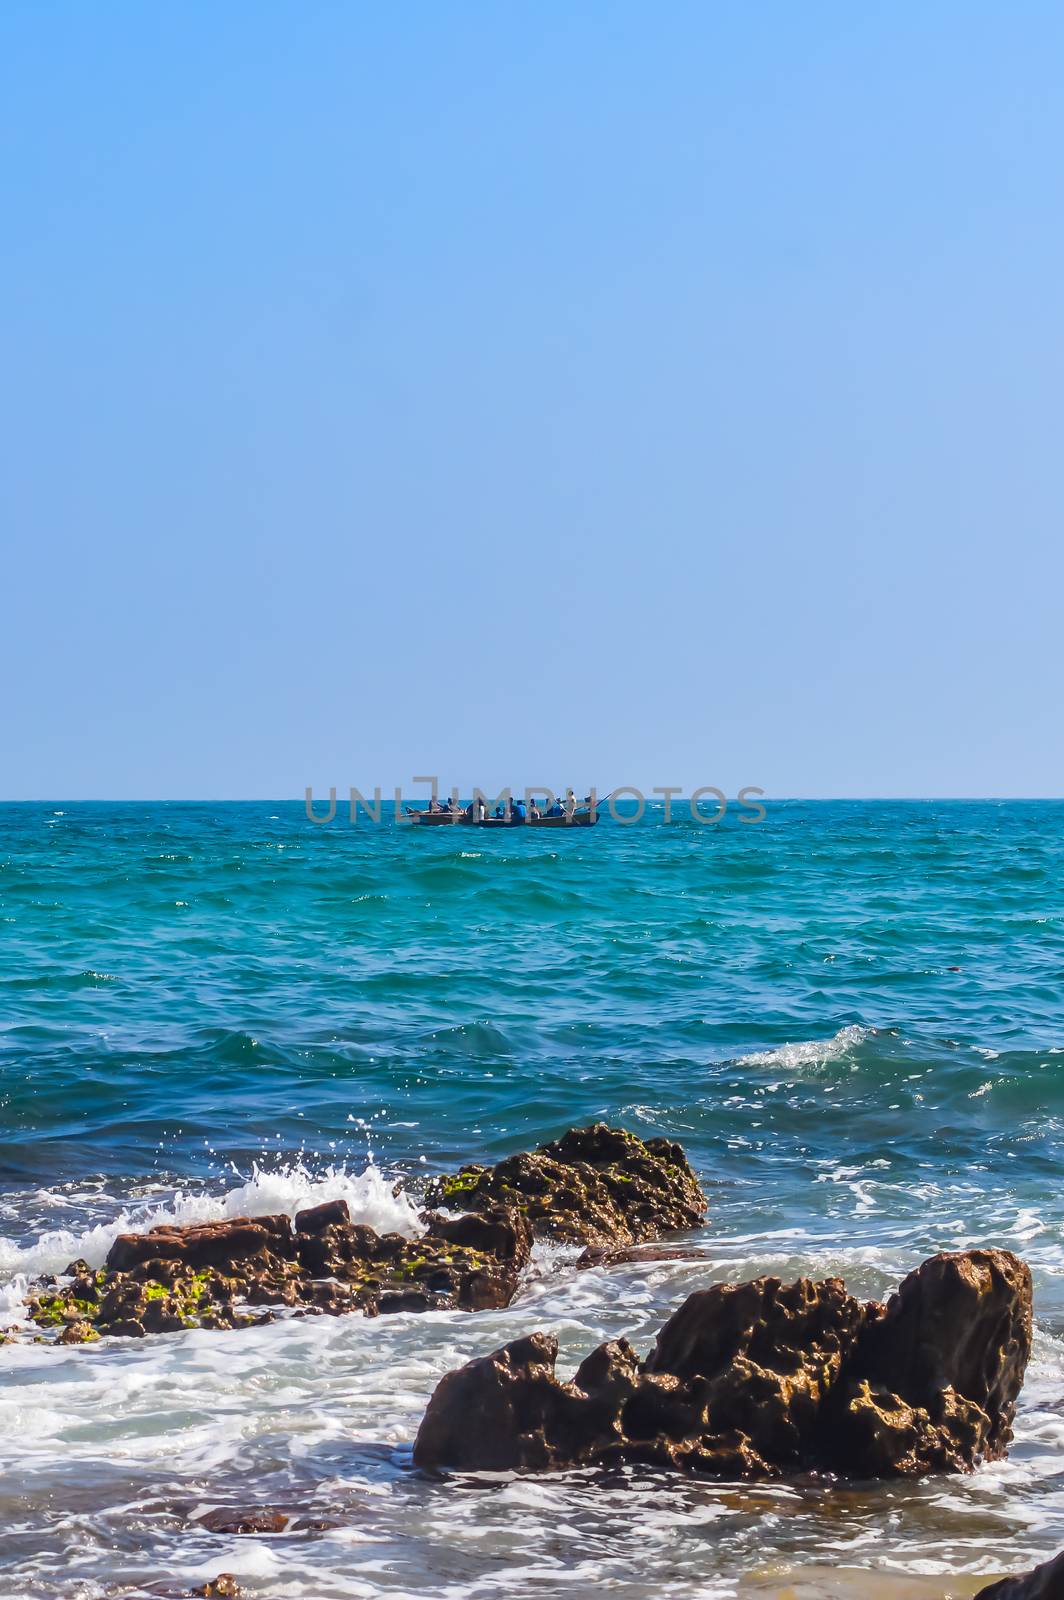 Photograph of Rowing Boat in Sea taken from a distance on a sunny day by sudiptabhowmick